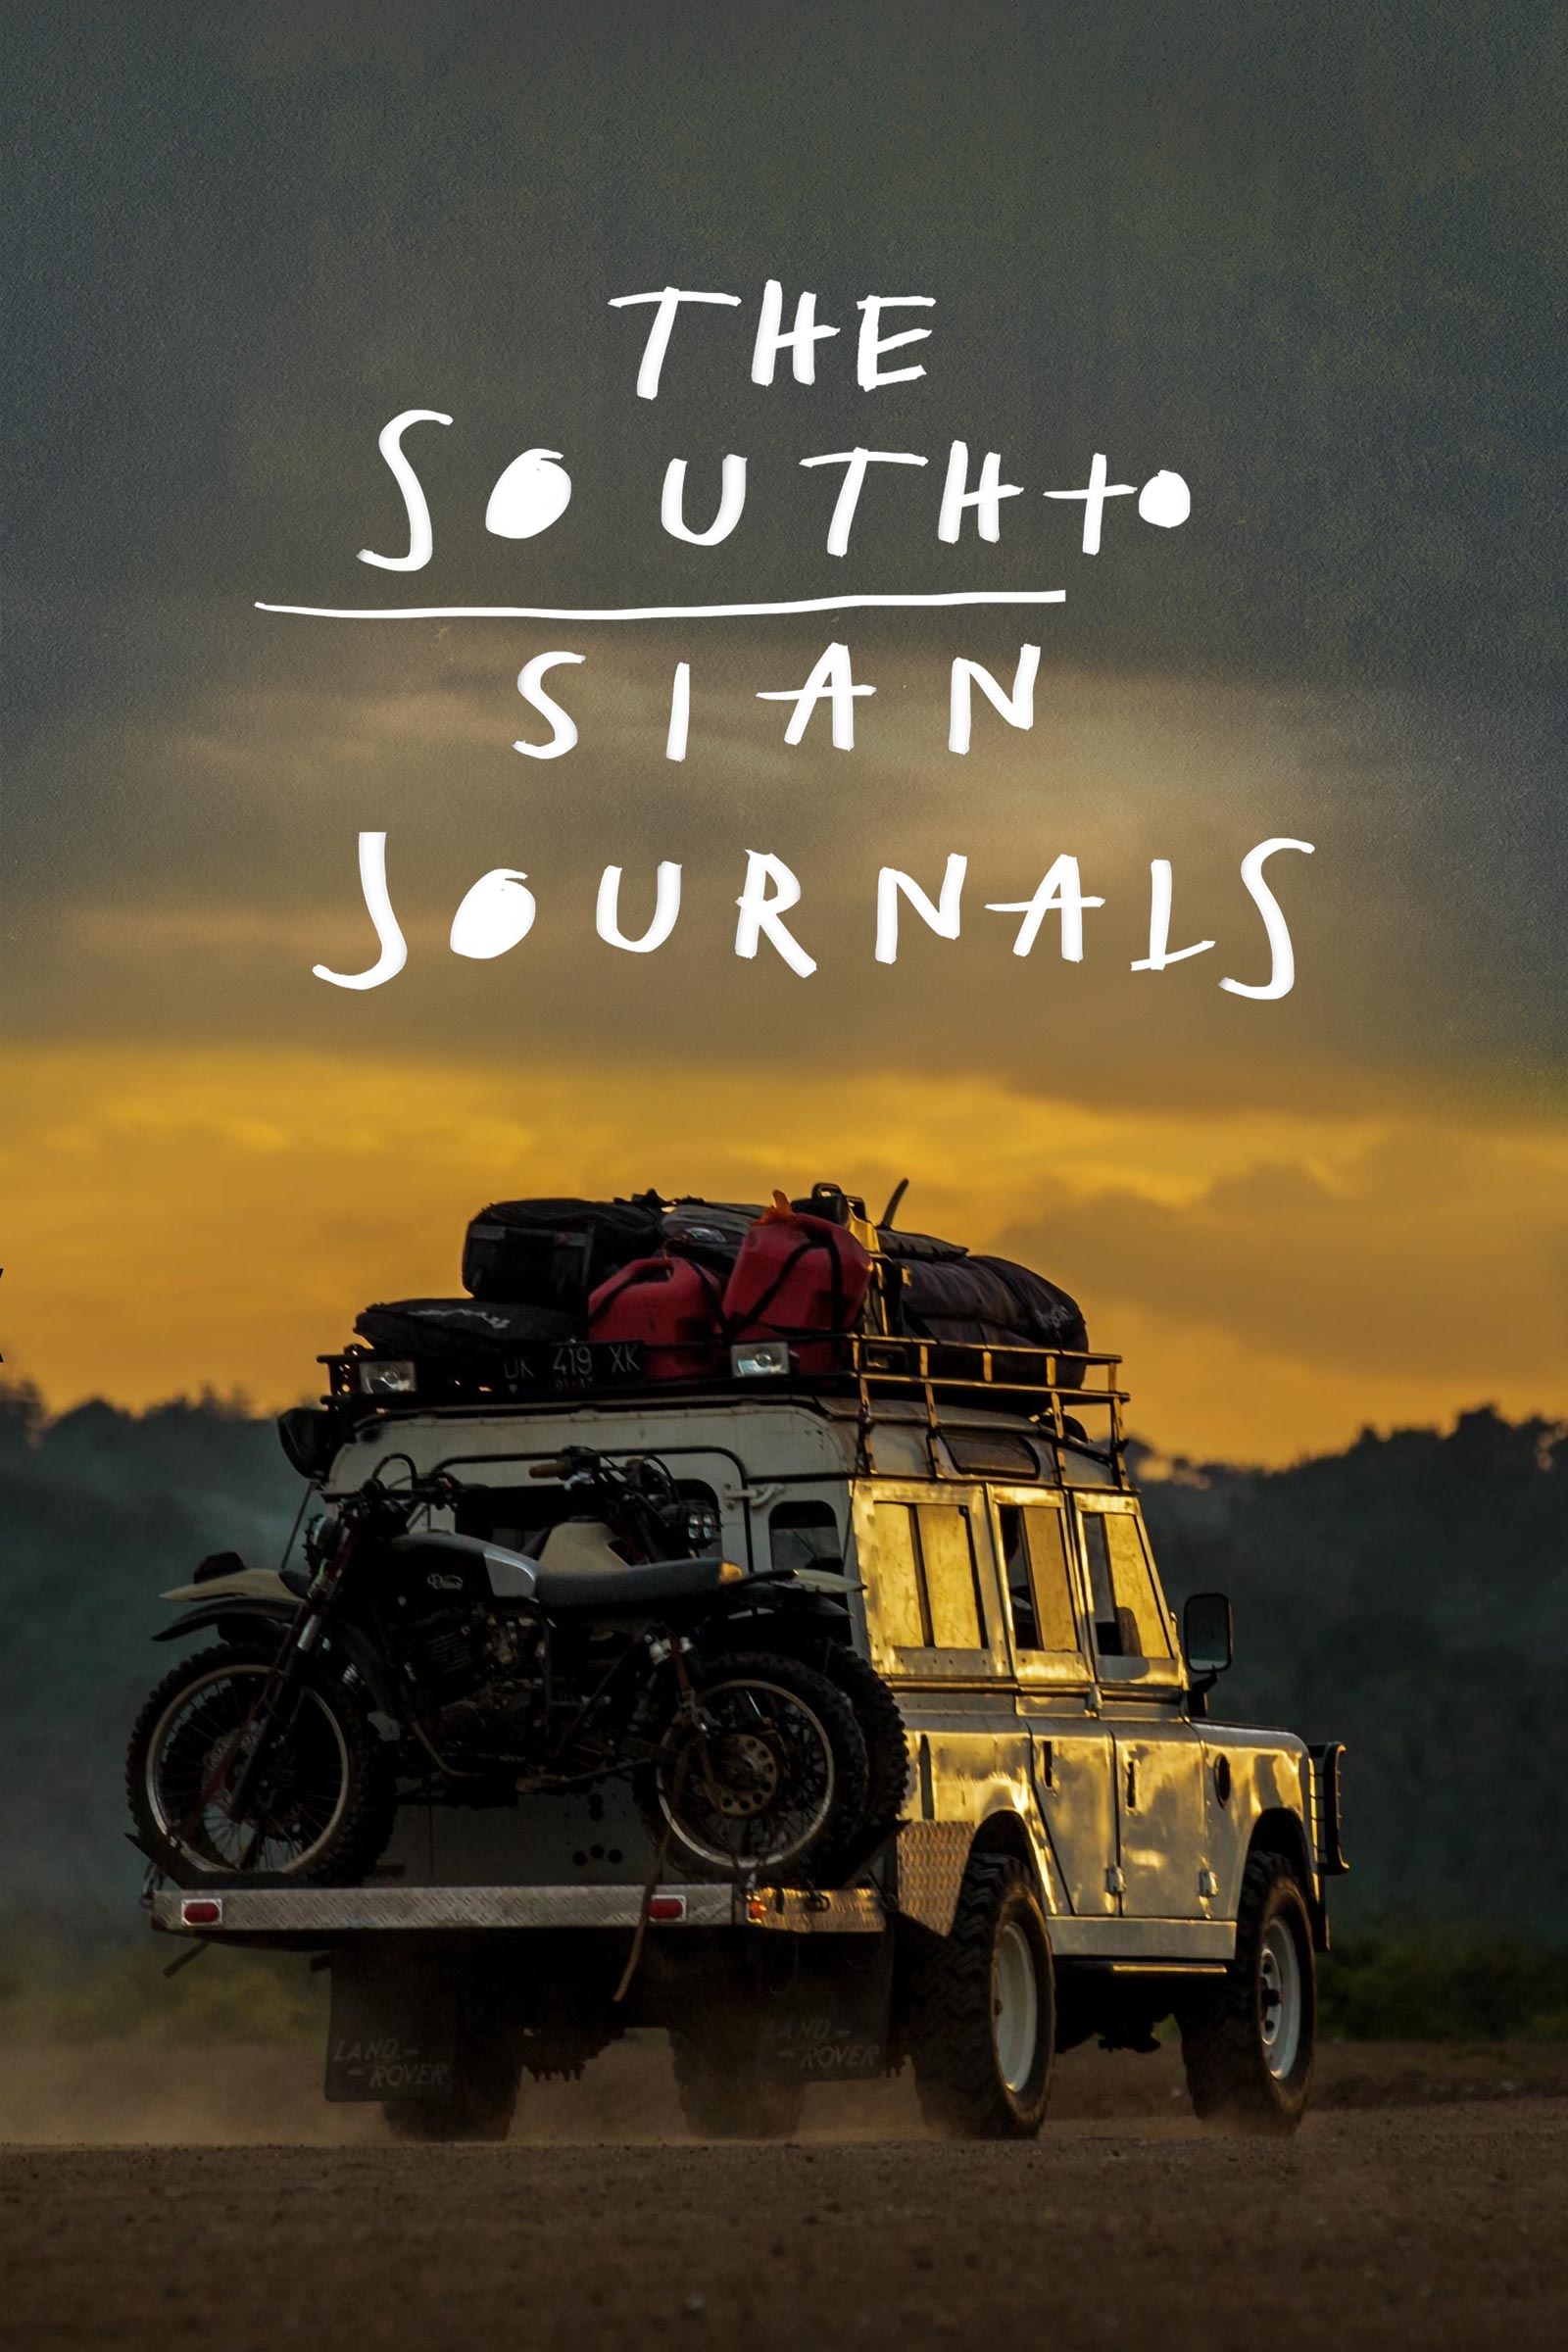 Where to stream The South To Sian Journals